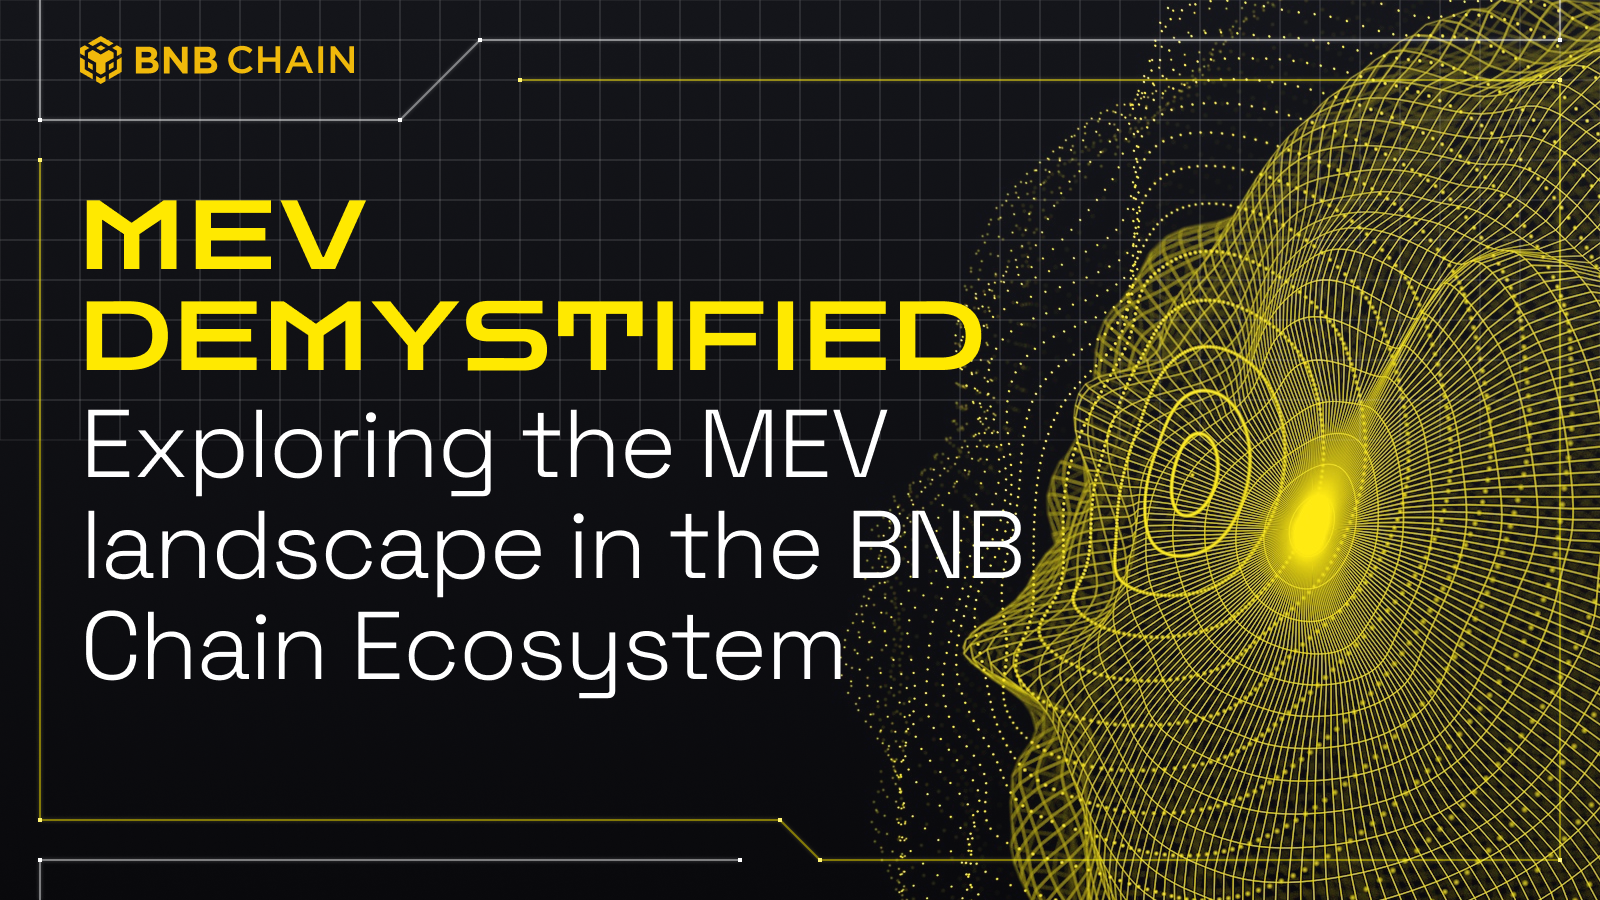 MEV Demystified:  Exploring the MEV landscape in the BNB Chain Ecosystem